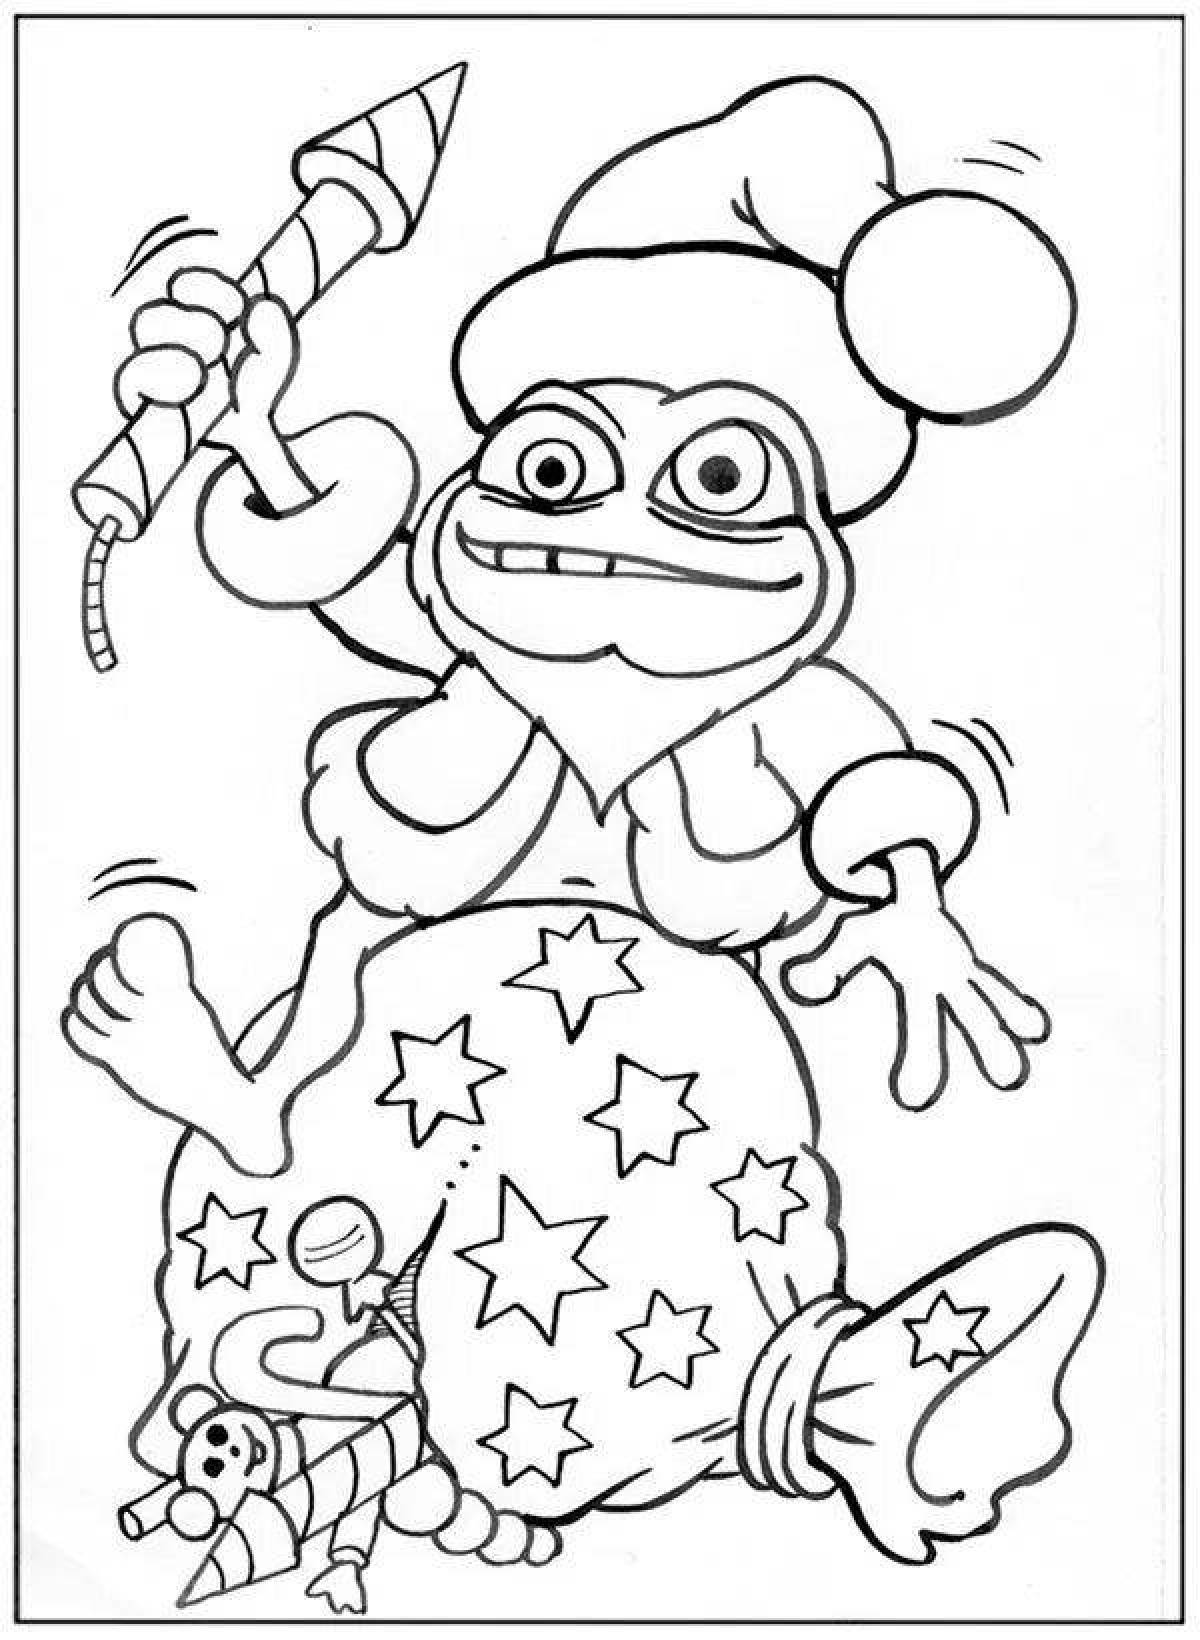 Fabulous crazy frog coloring book